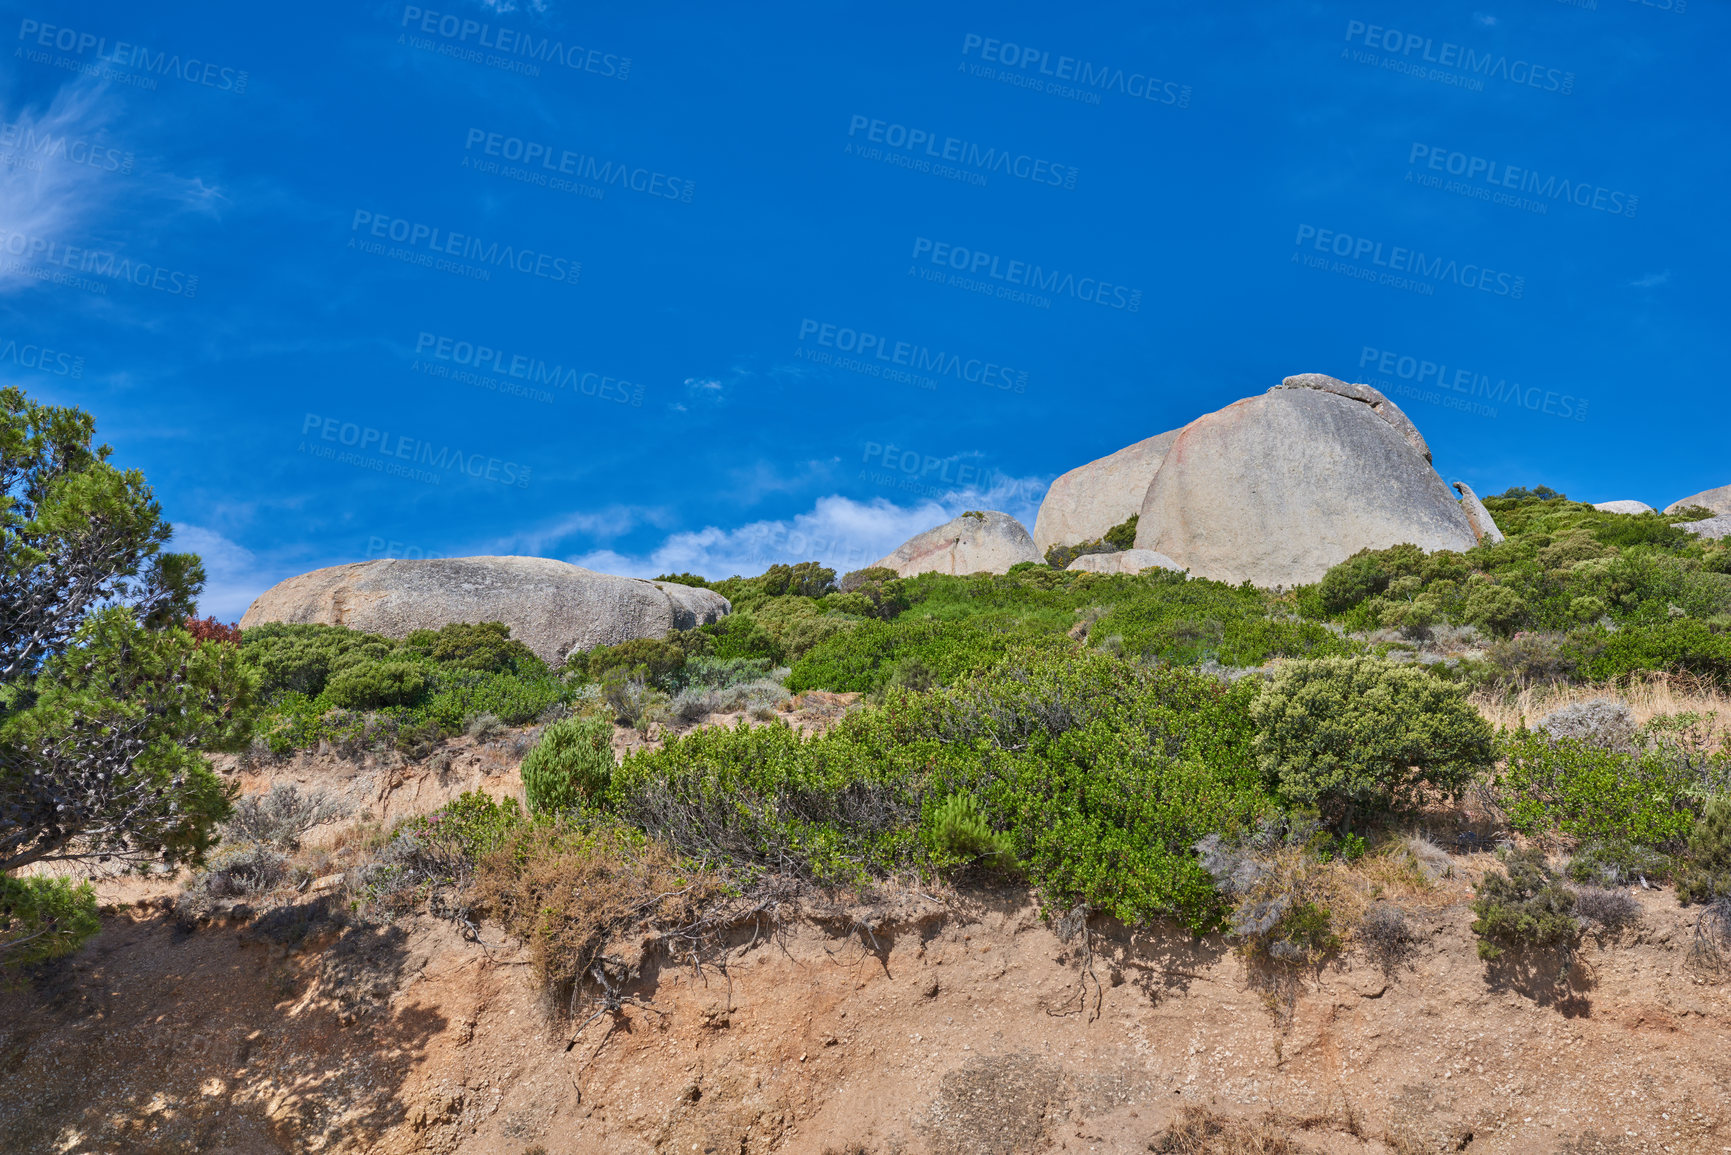 Buy stock photo Landscape scenic view, blue sky with copy space of Lions Head mountains in Cape Town, South Africa. Famous steep hiking, and trekking terrain with growing green trees, lush shrubs, and bushes